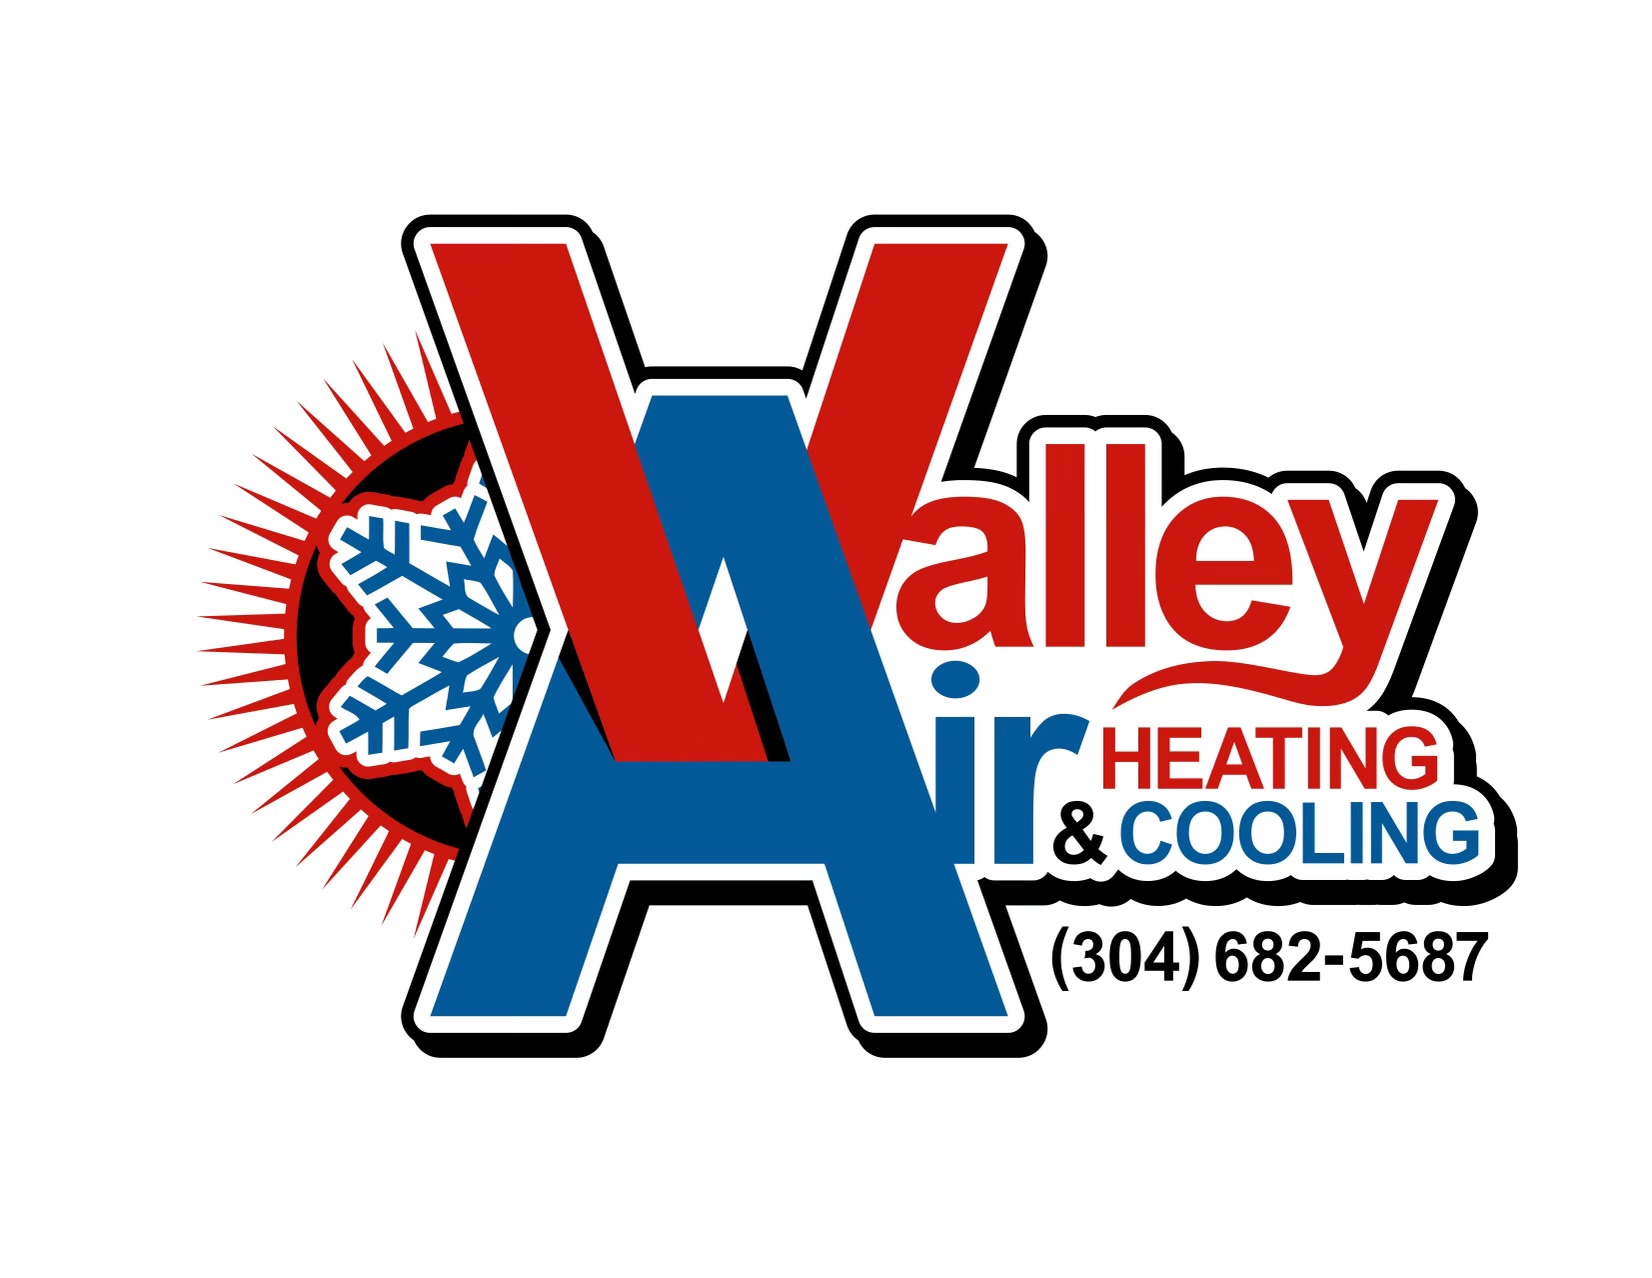 VALLEY AIR HEATING & COOLING